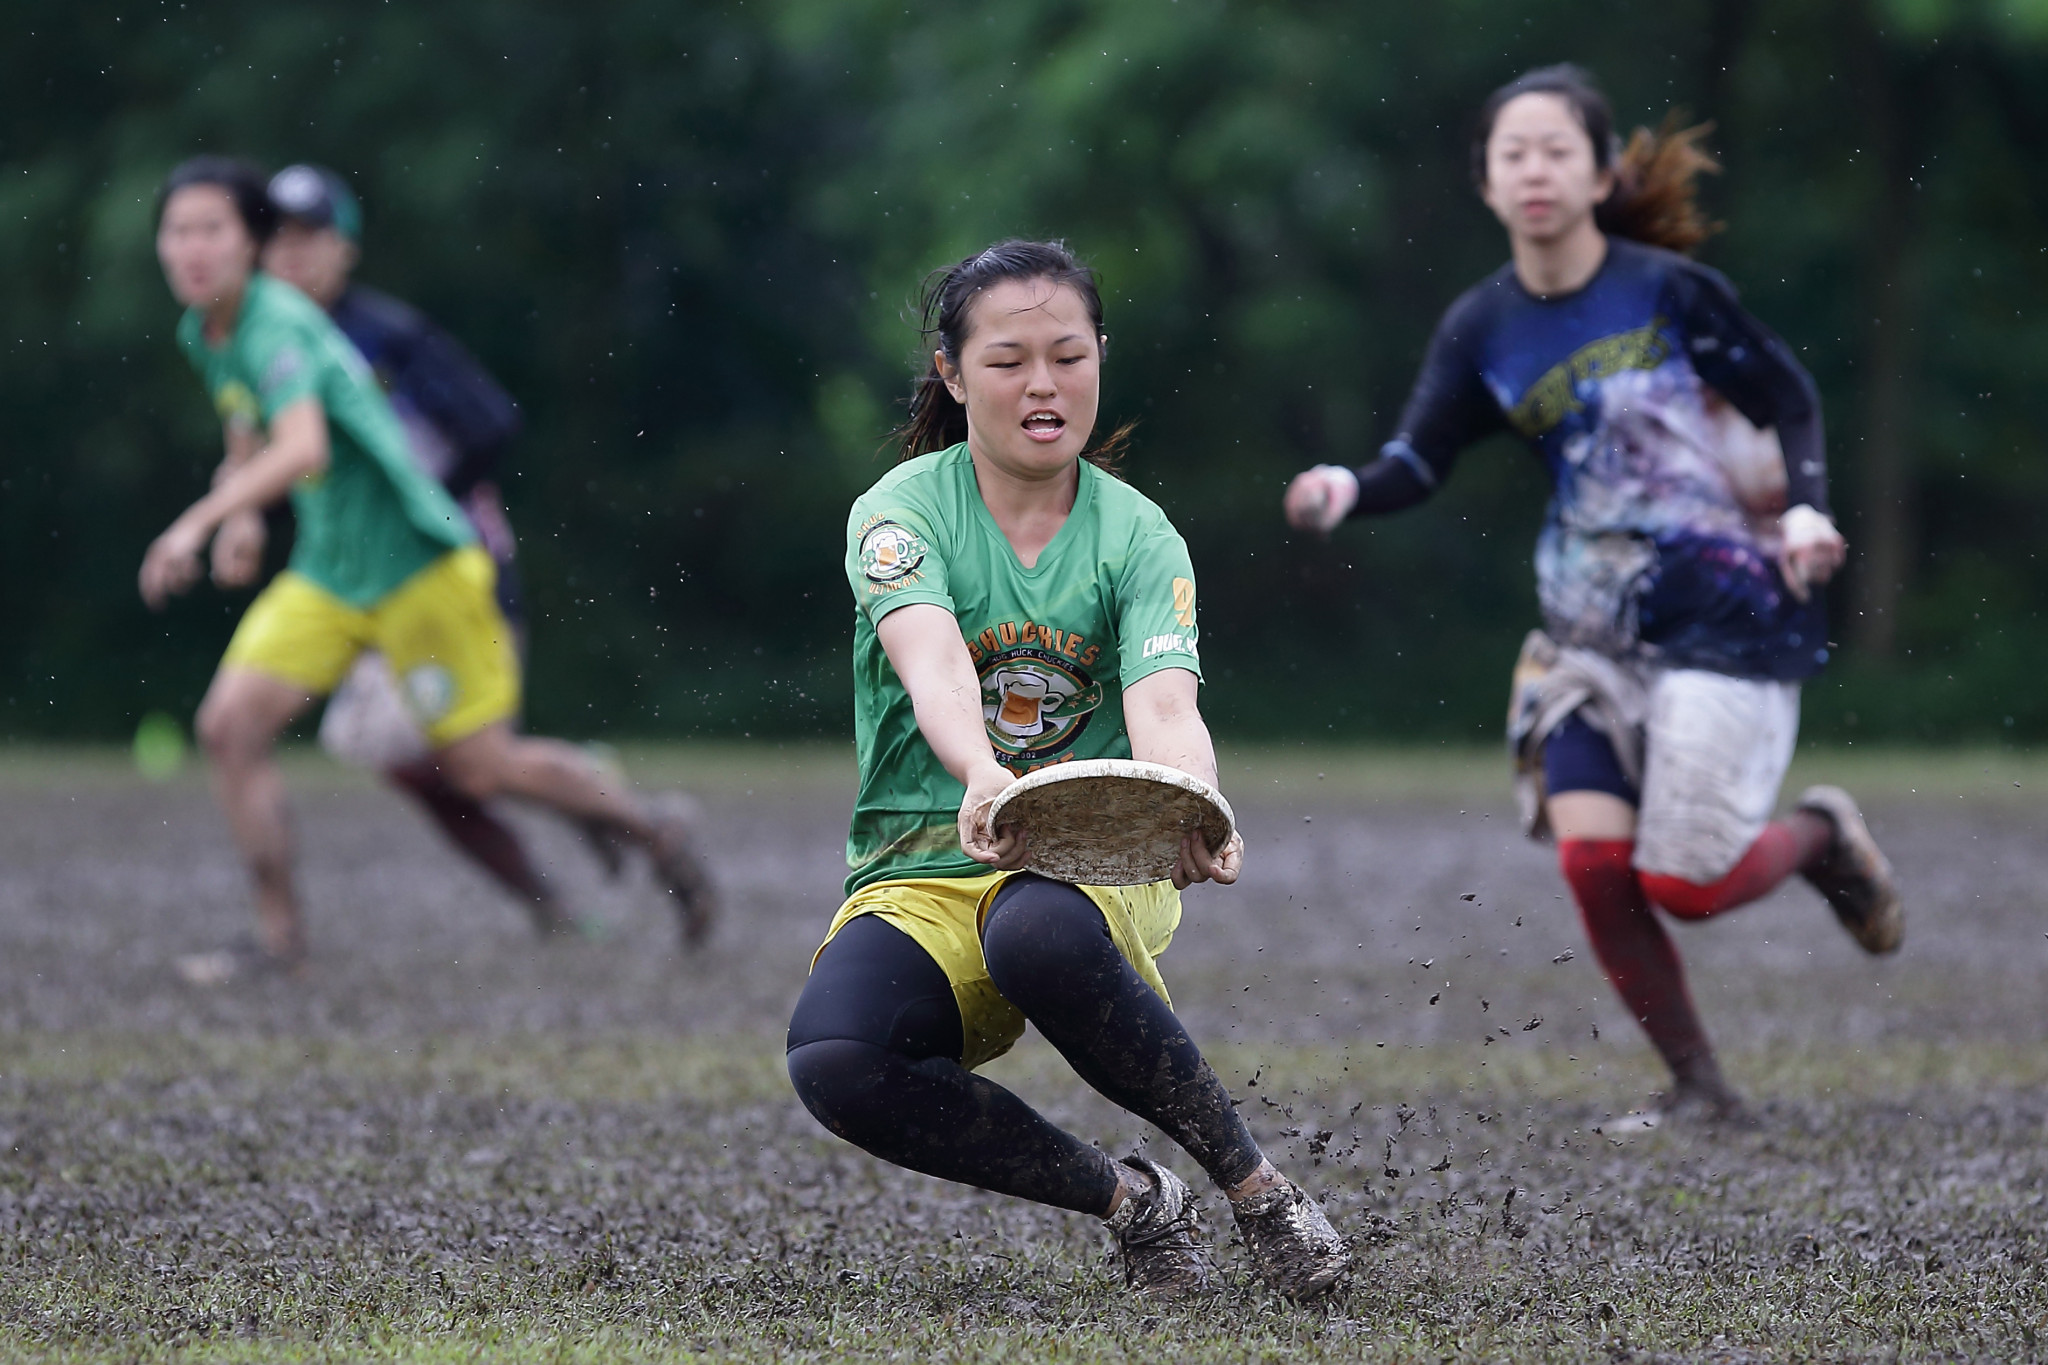 A new teaching guide for ultimate has been released ©Getty Images